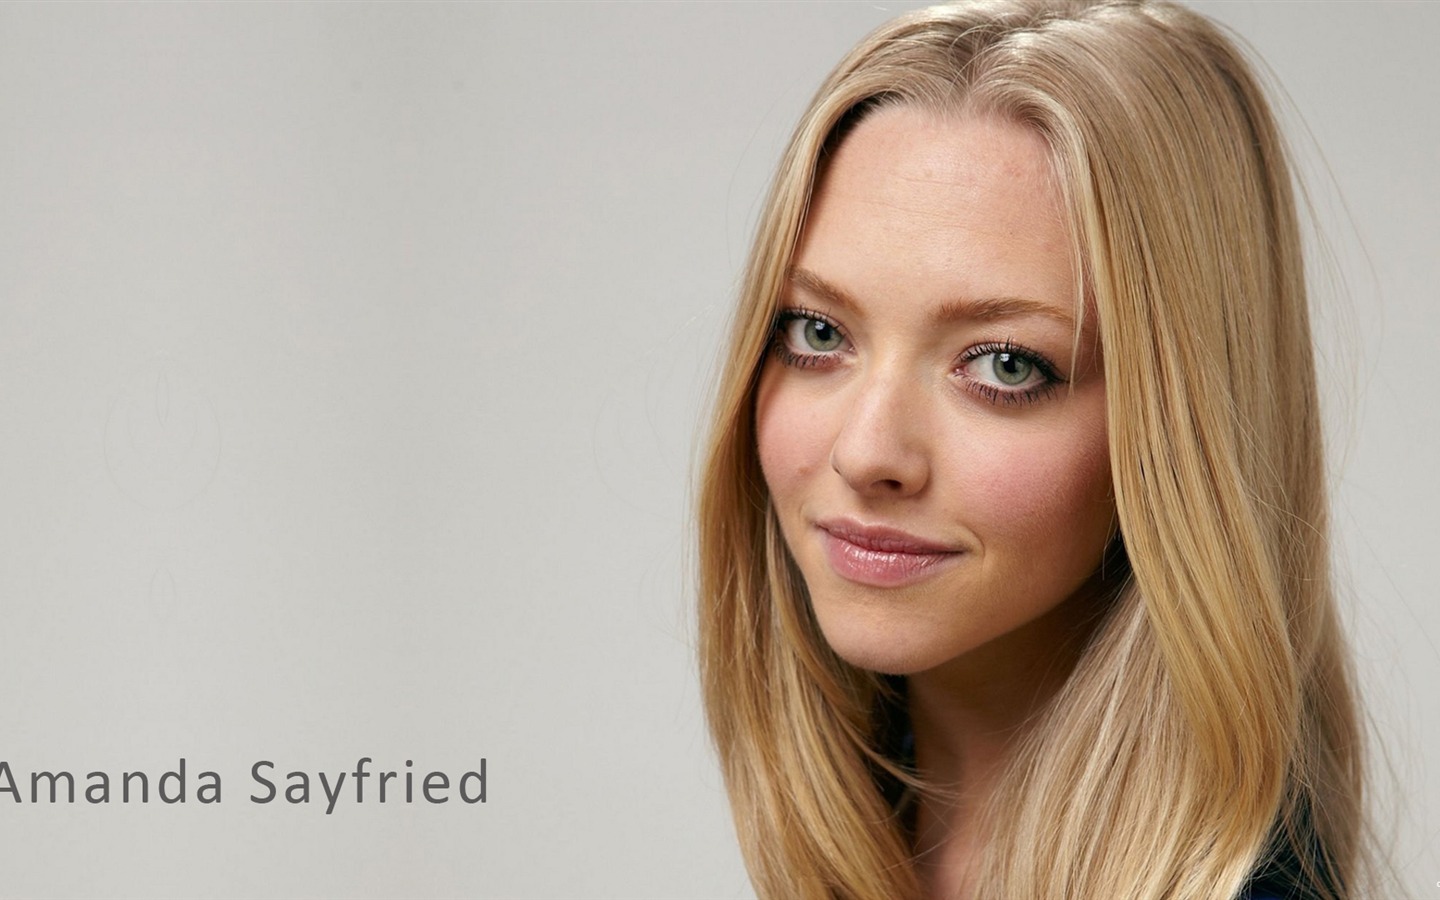 Amanda Seyfried #014 - 1440x900 Wallpapers Pictures Photos Images